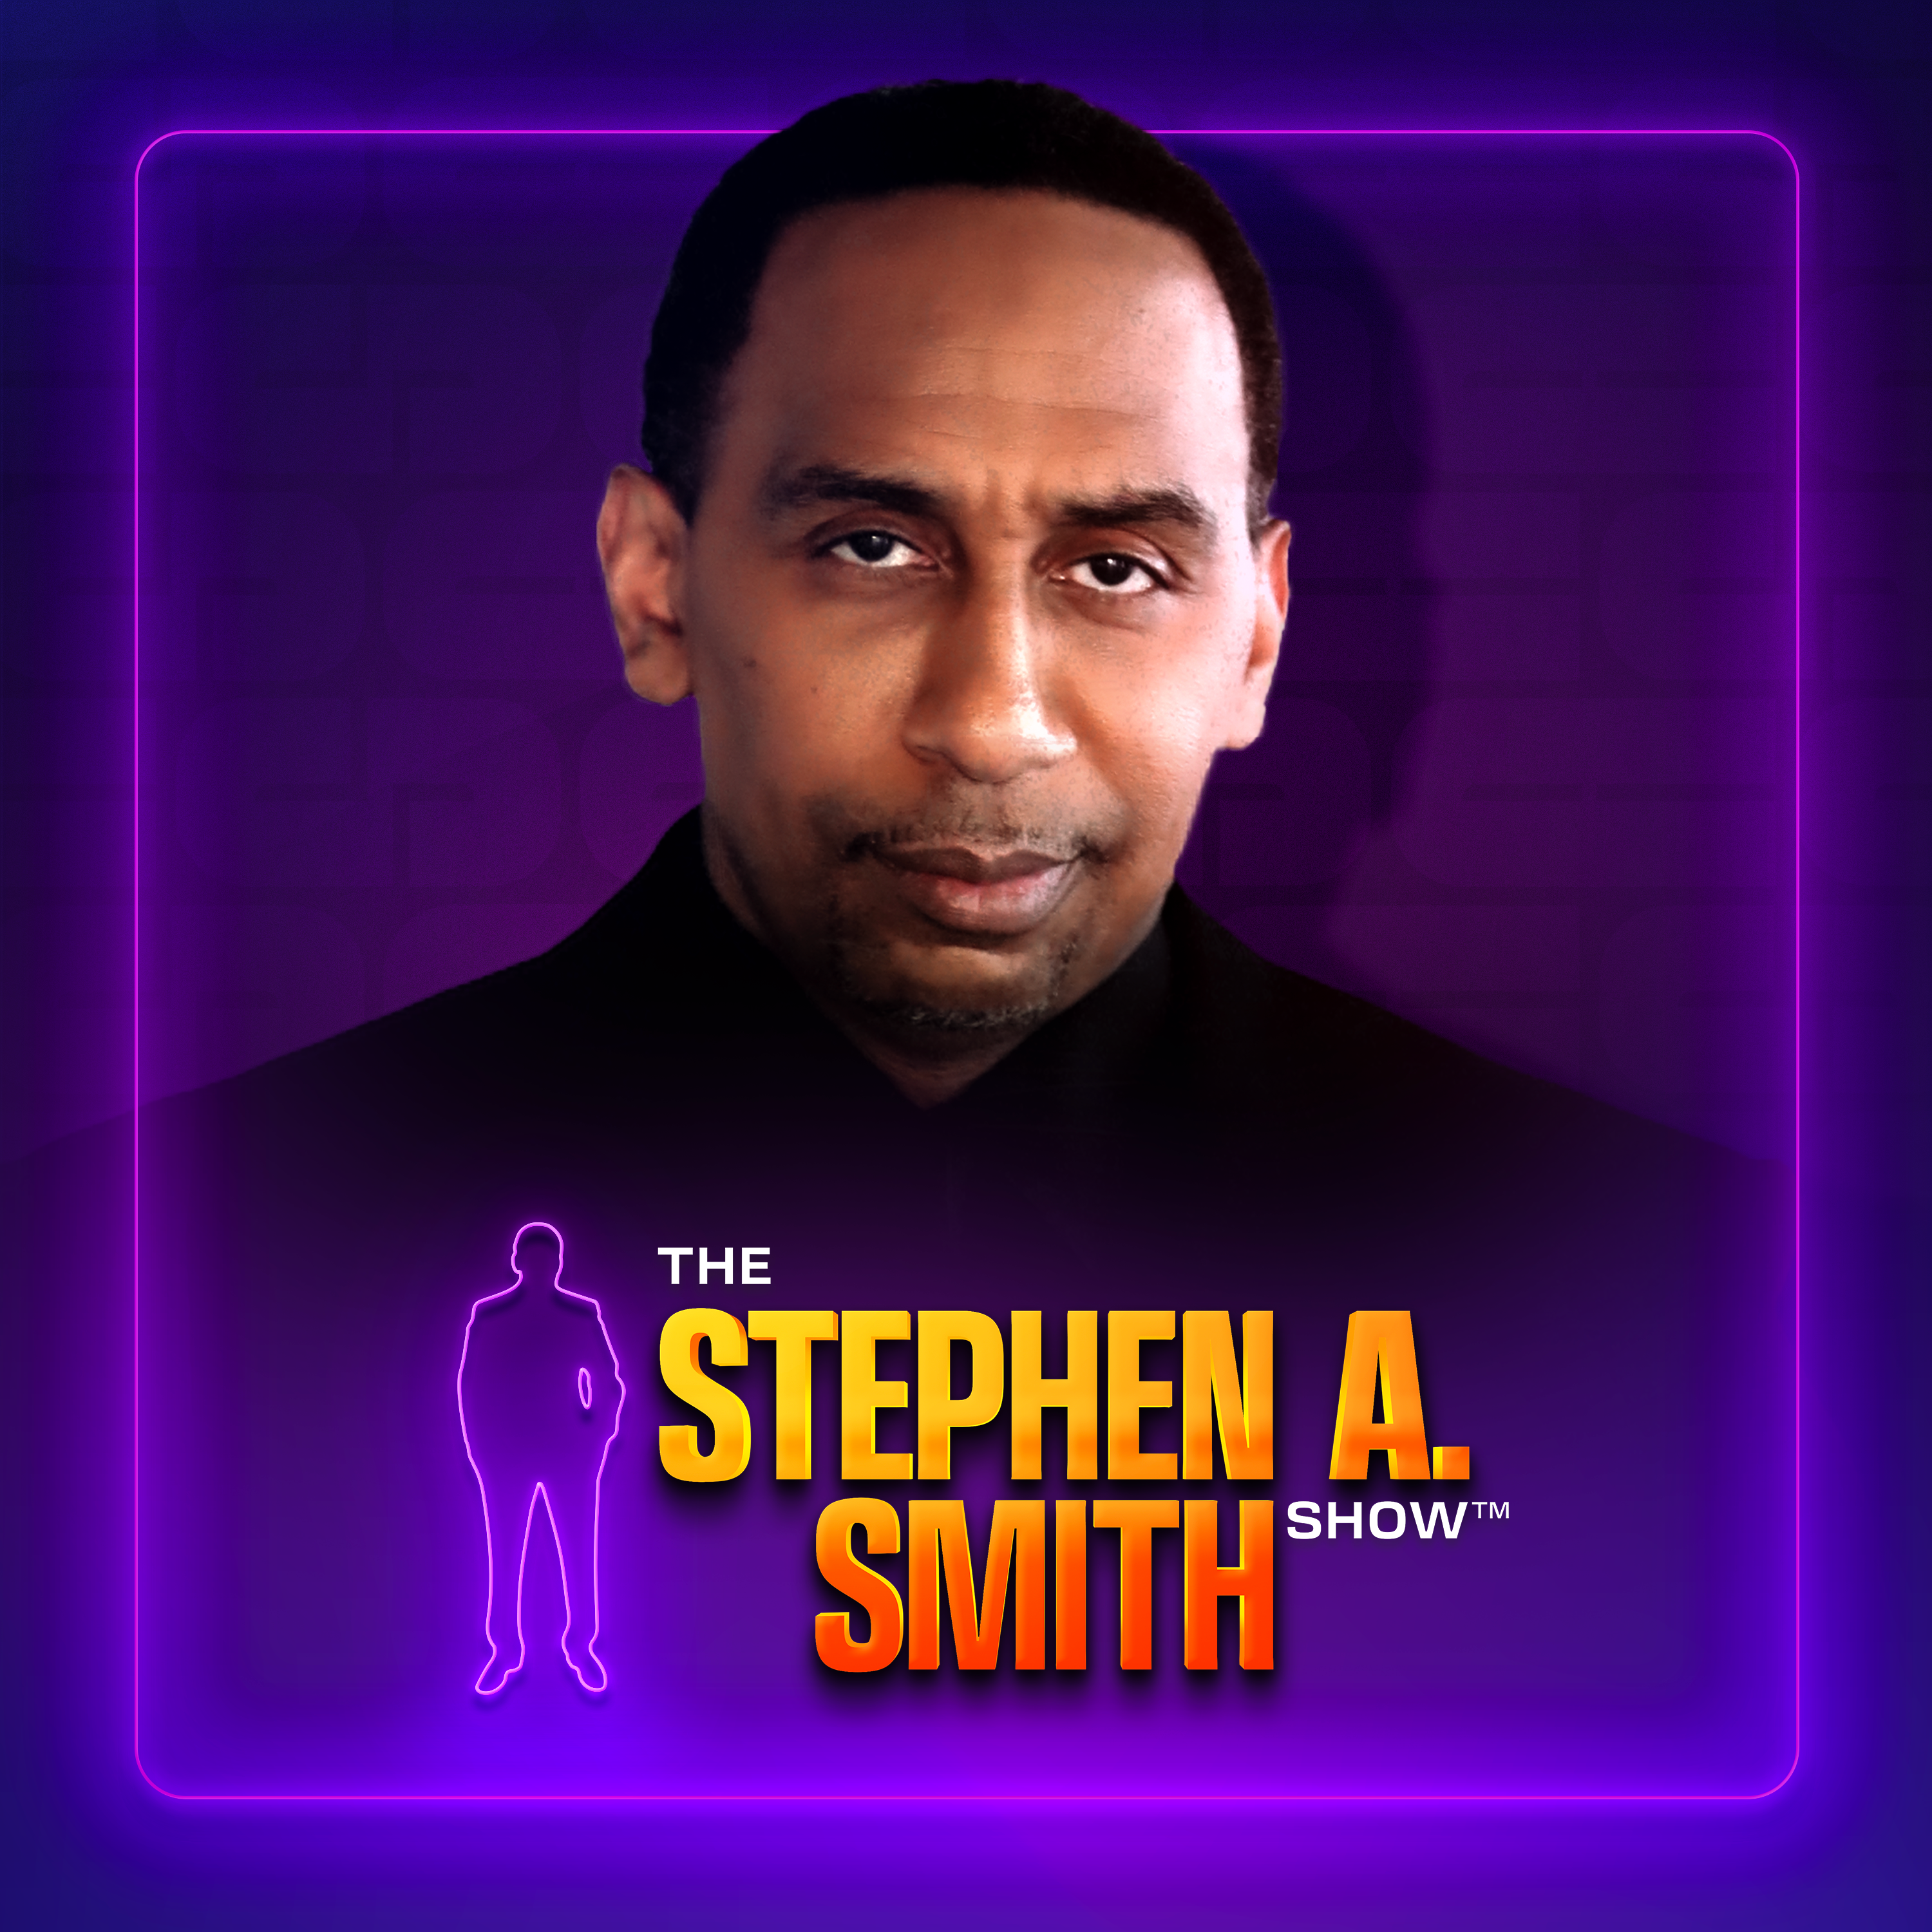 Full Show: Special Get@Me Fan Edition of Stephen A. Smith responding to fan social media questions, phone calls and video submissions.